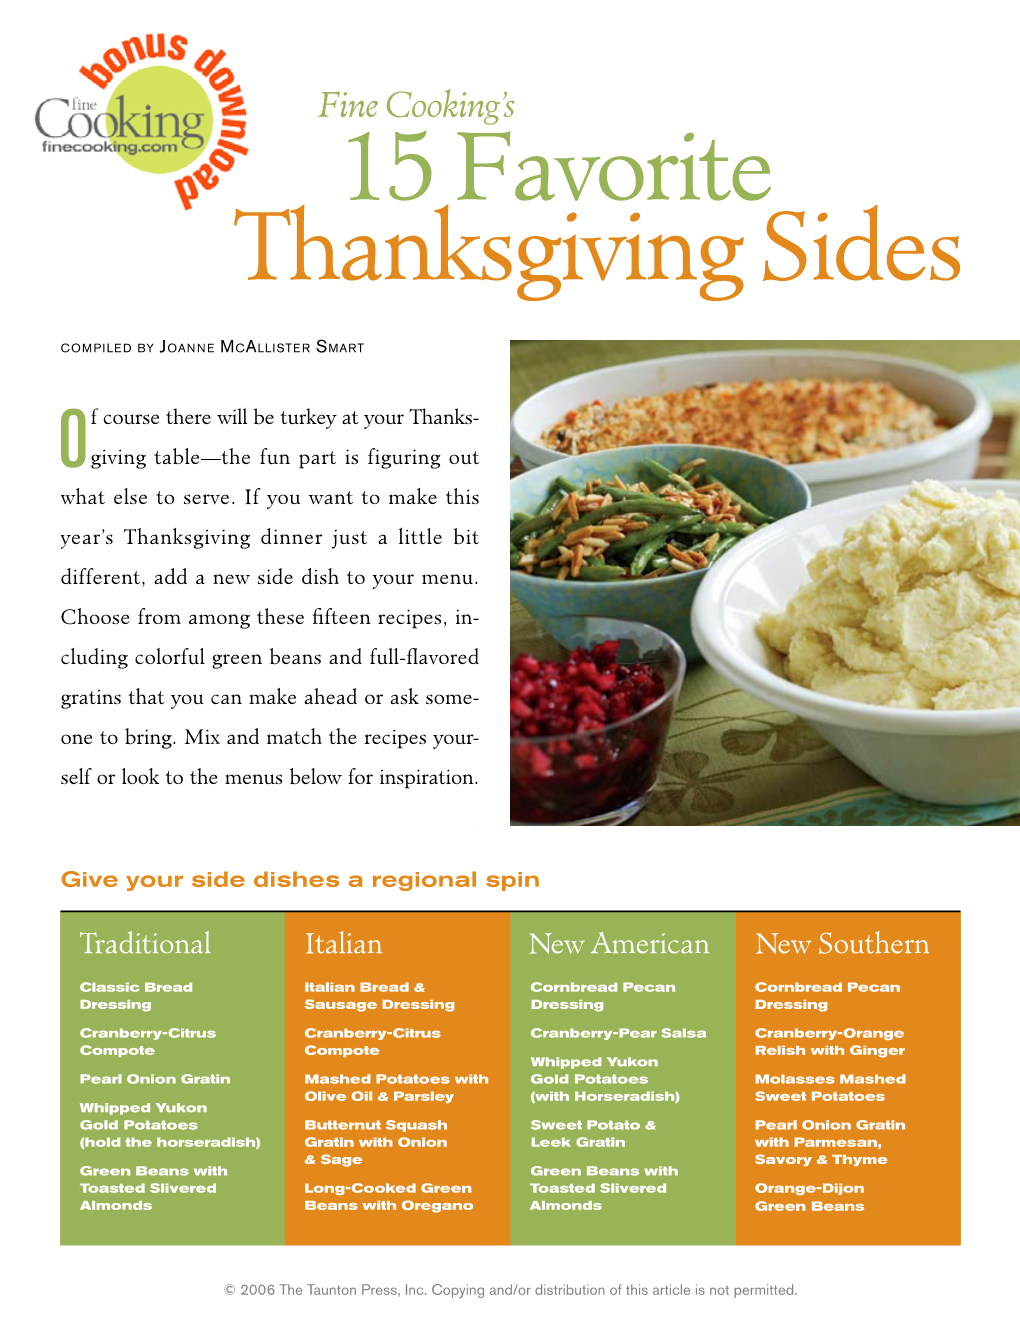 Top 15 Thanksgiving Sides